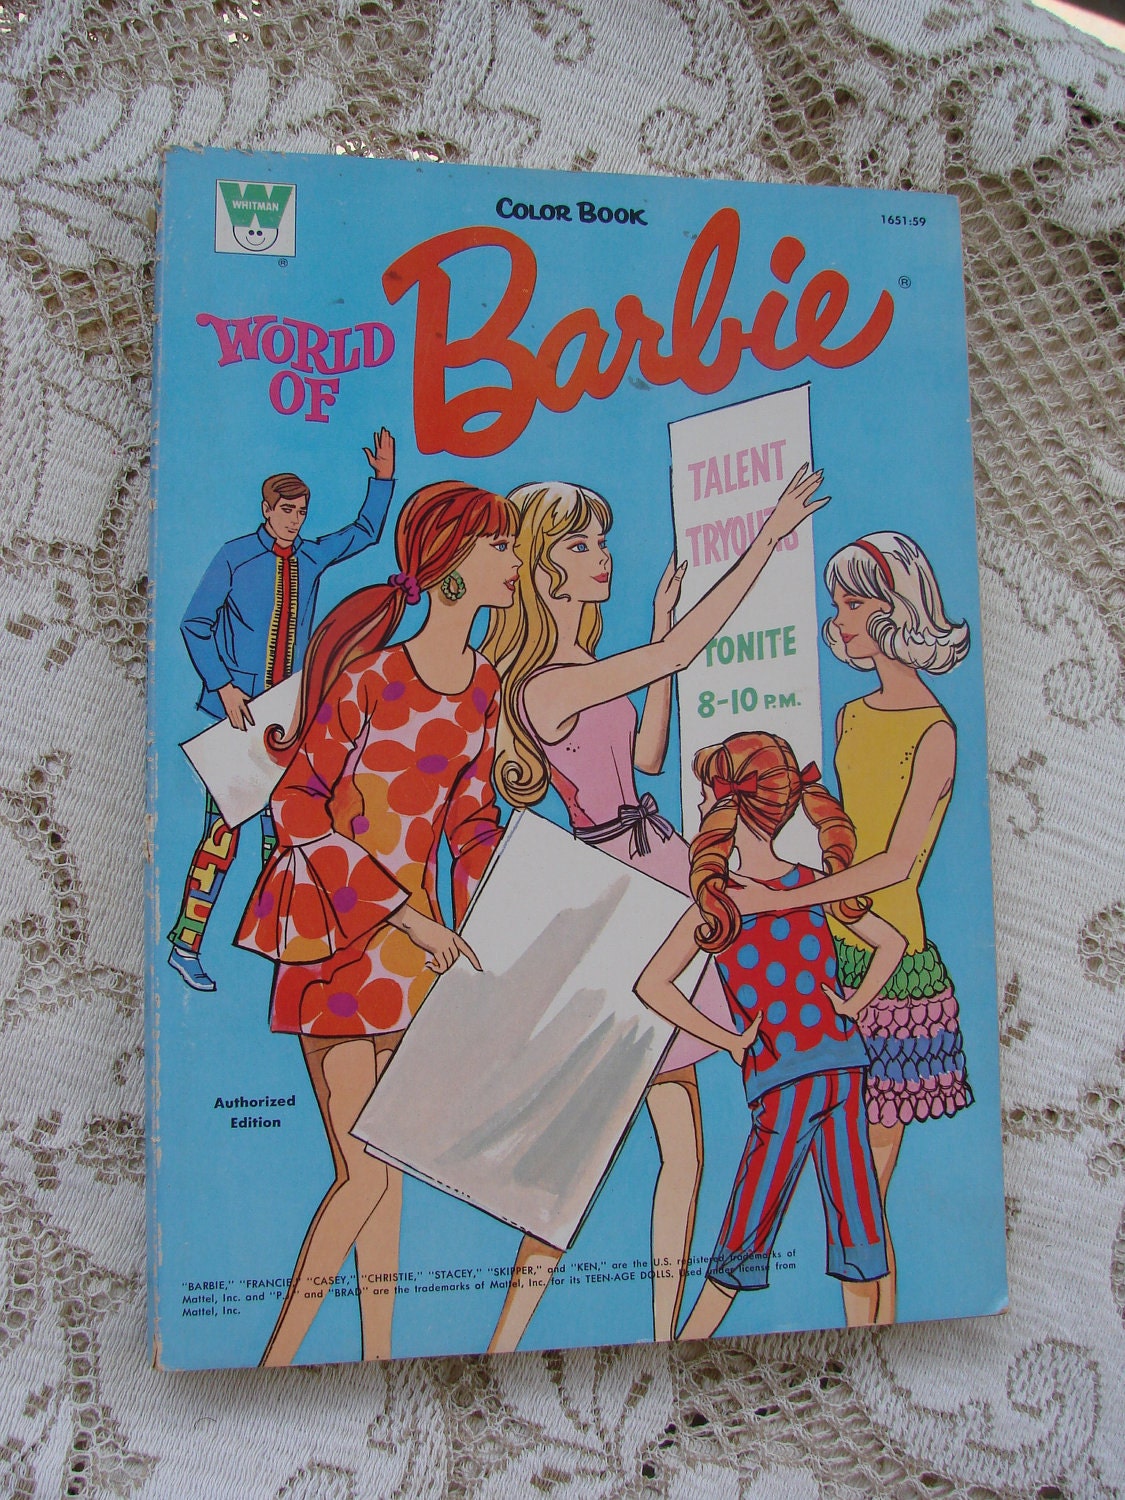  VIntage  1971 World of Barbie  Coloring  Book  by thecherrychic